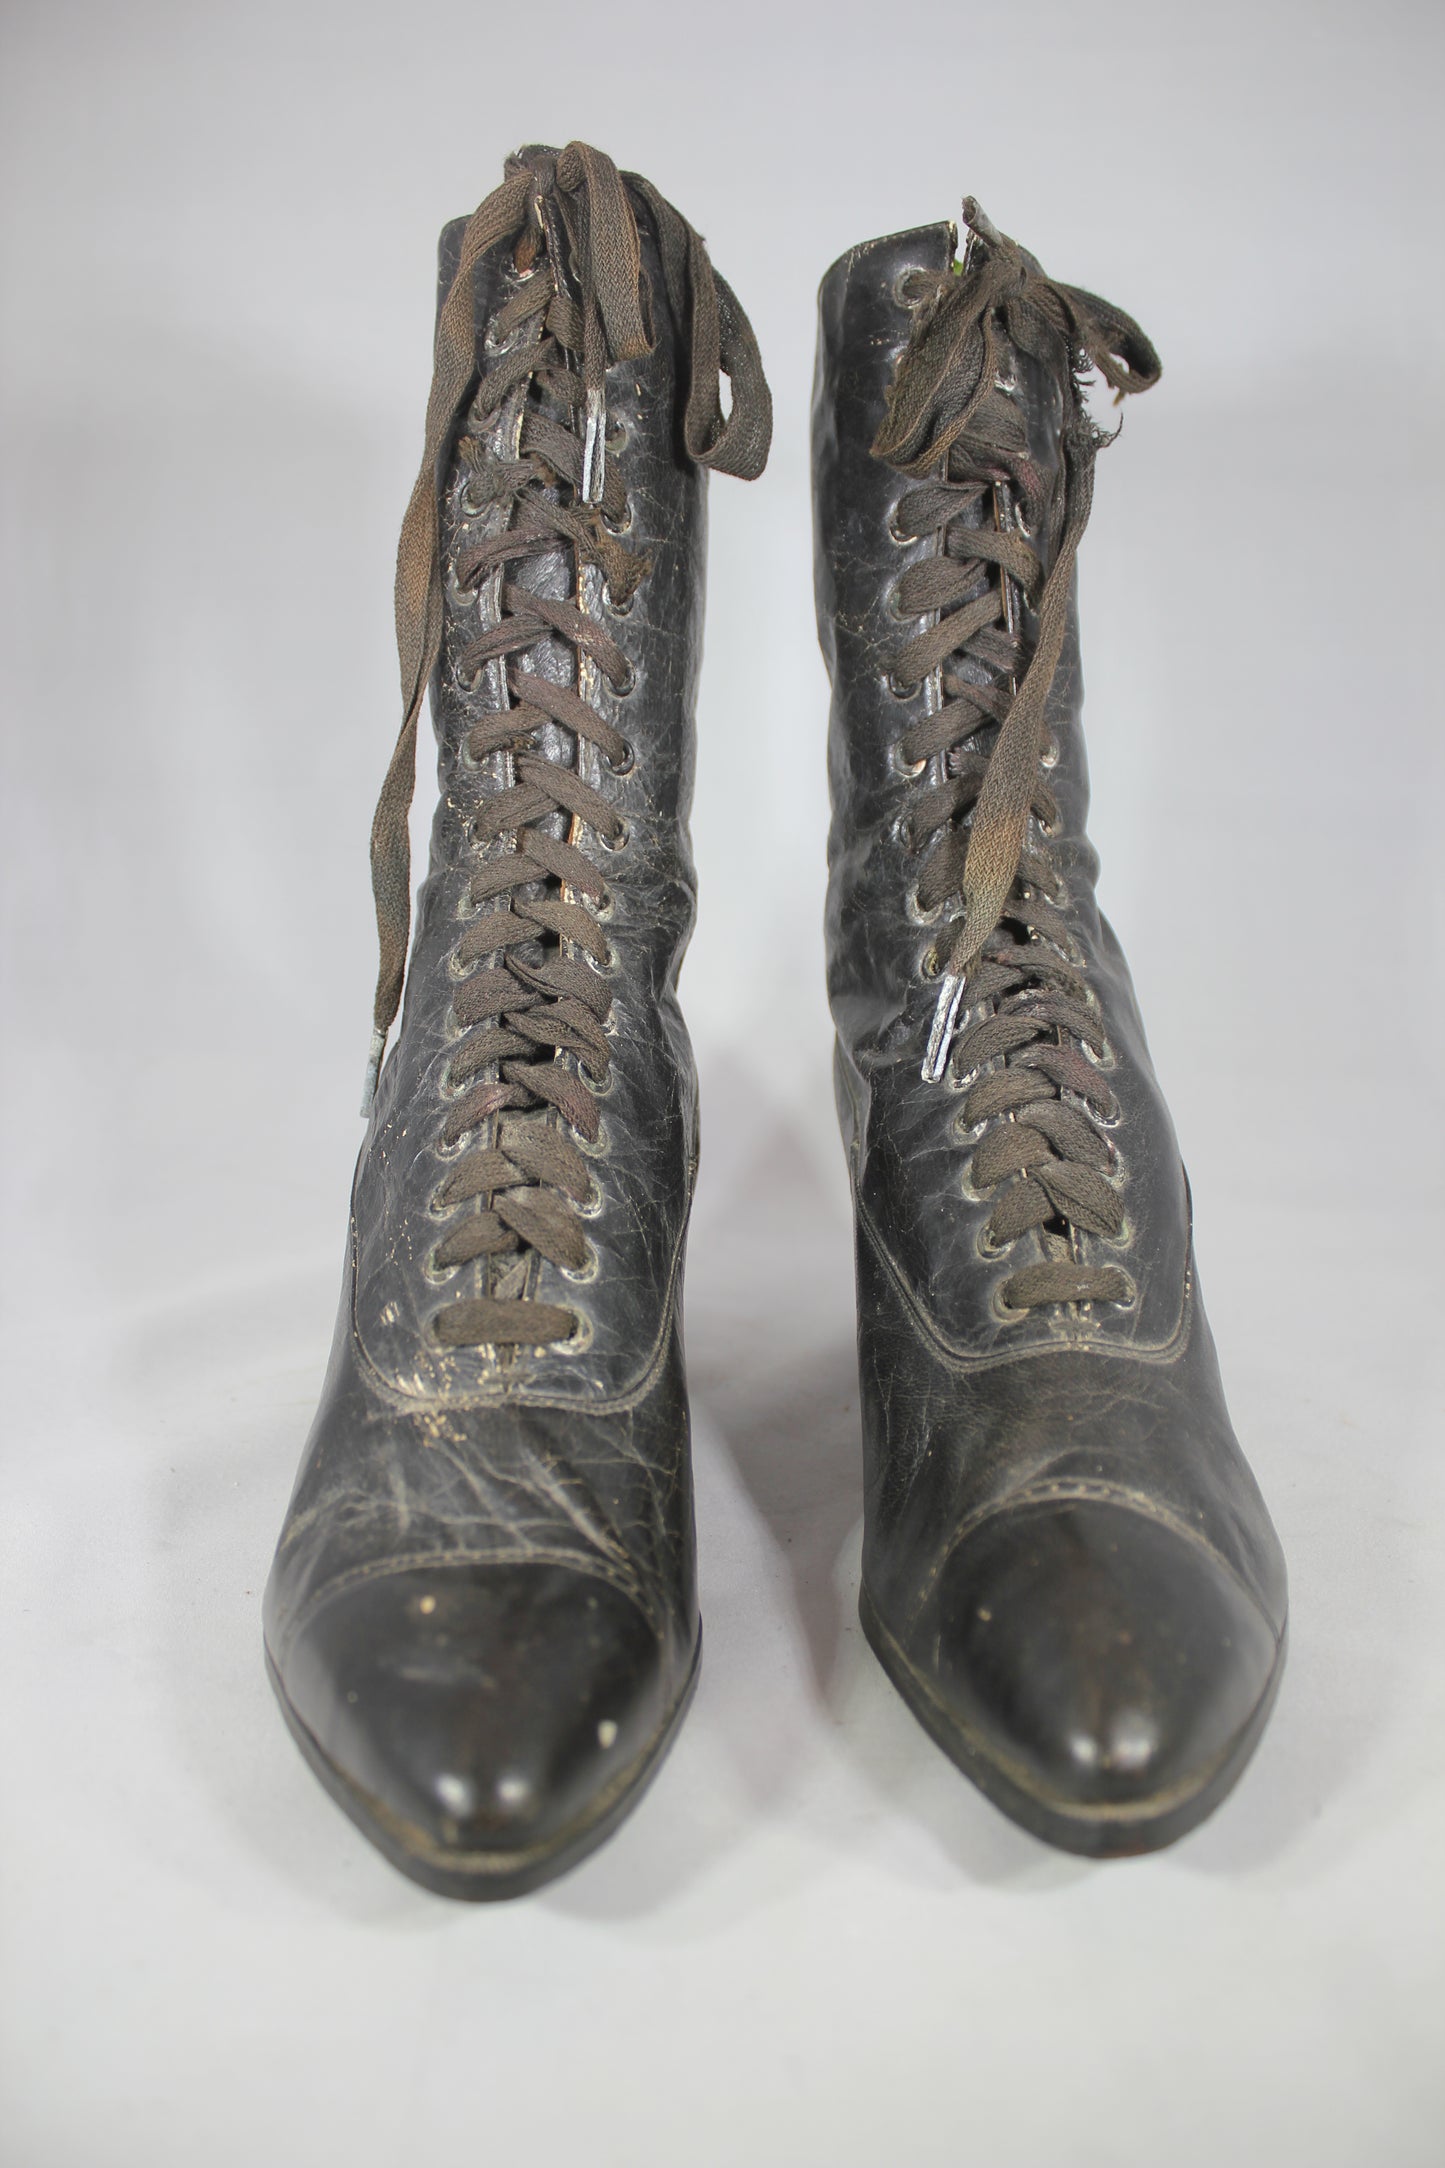 Victorian Lace-Up Black Leather Women's Boots, High-Top Shoes, by Hamilton Brown Shoe Co.